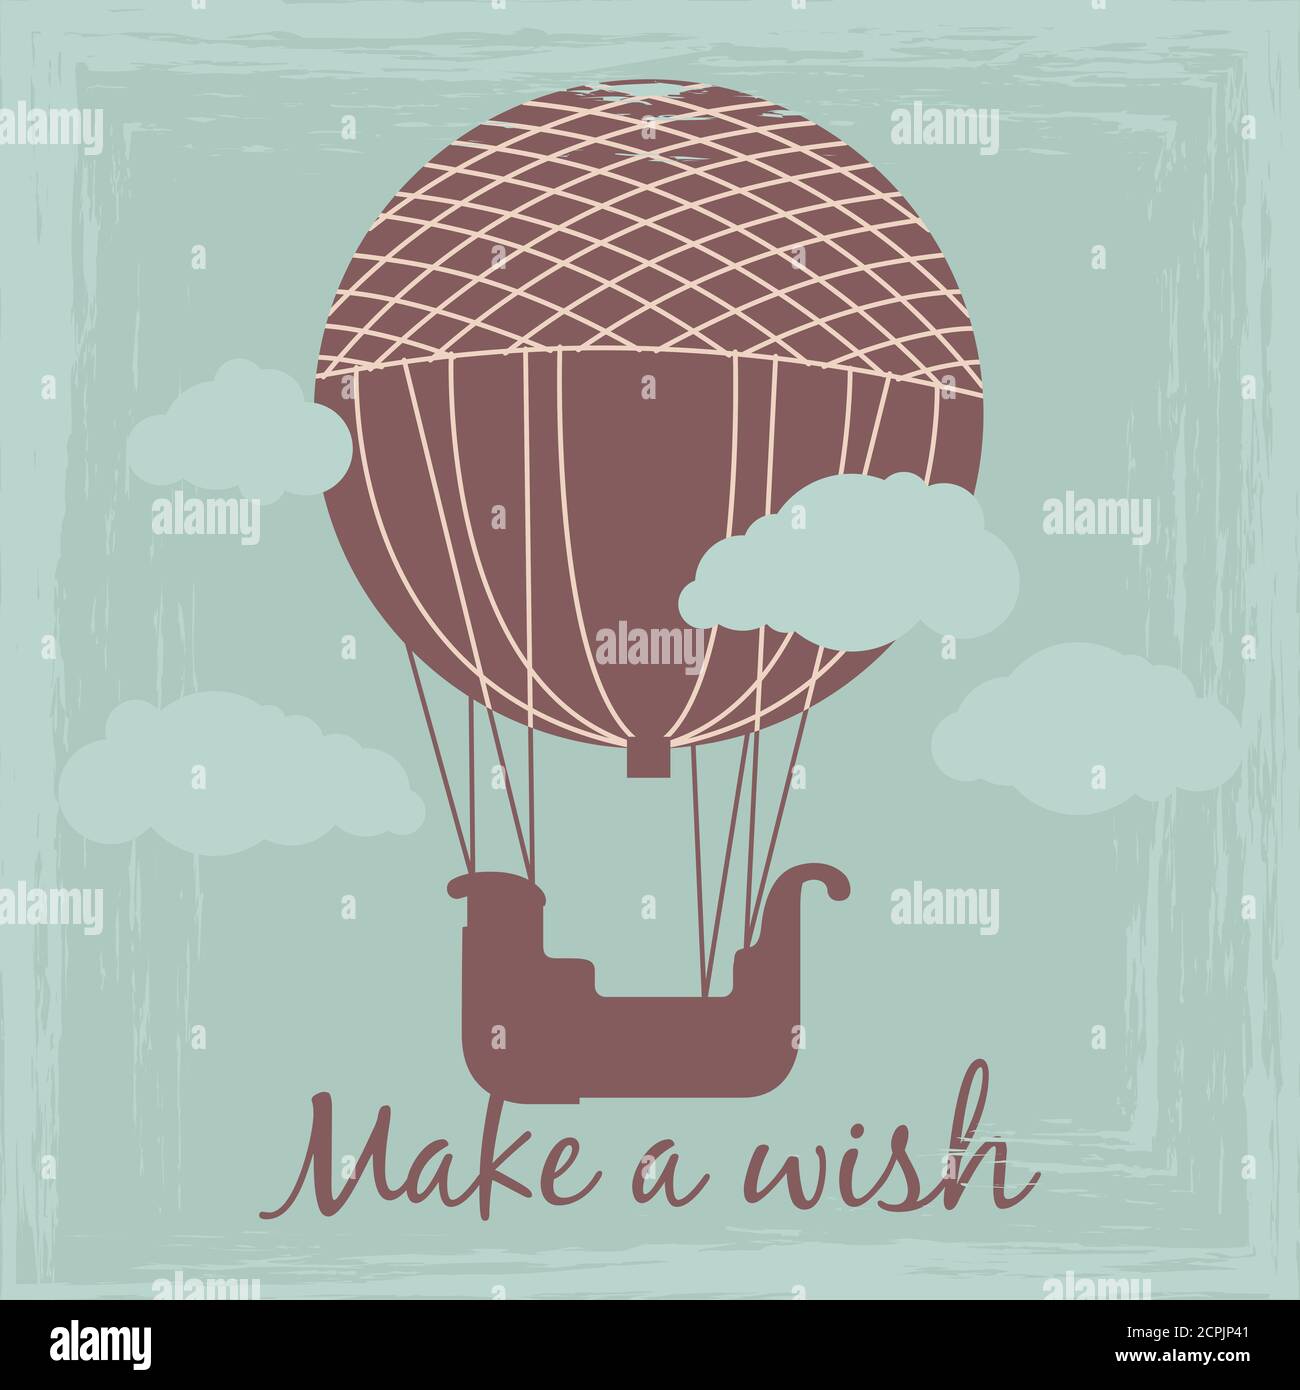 Make a wish vintage card vector template with hot air balloon silhouette. Illustration of air balloon poster, transport travel aerostat Stock Vector